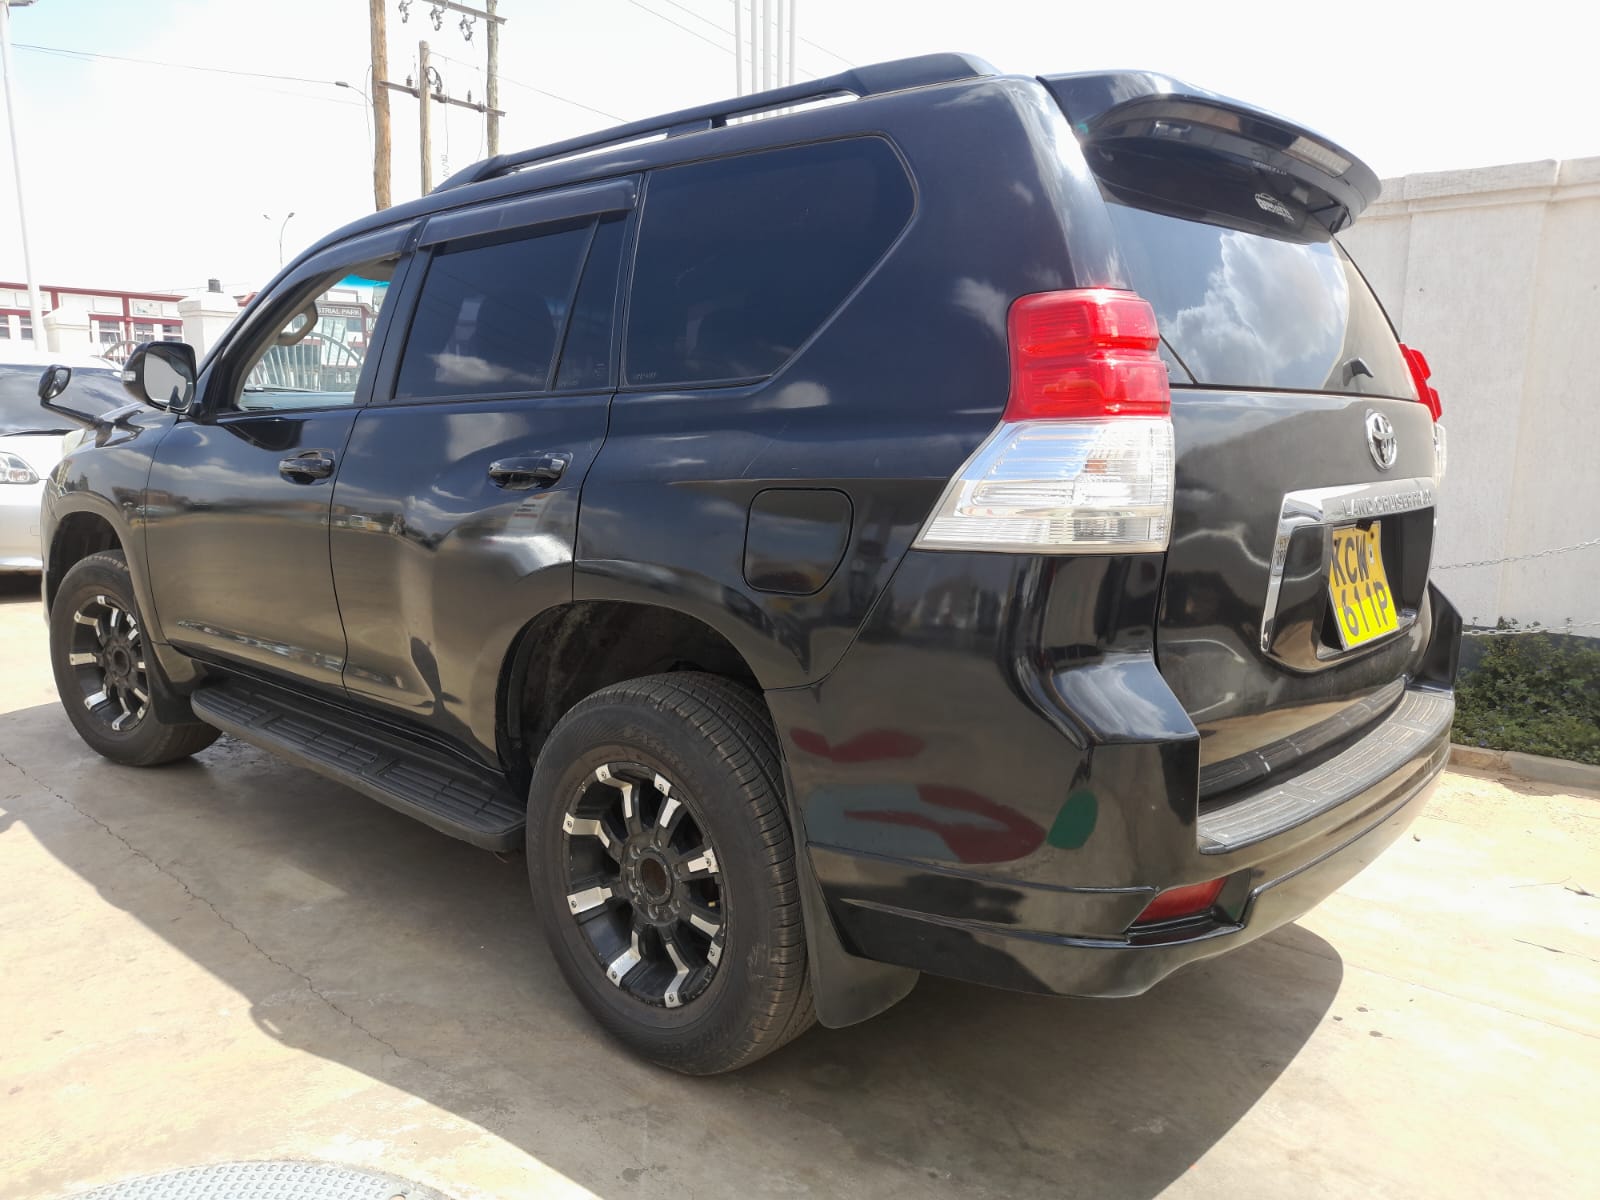 Toyota Prado 2013 SUNROOF QUICK SALE You Pay 30% Deposit Trade in OK EXCLUSIVE